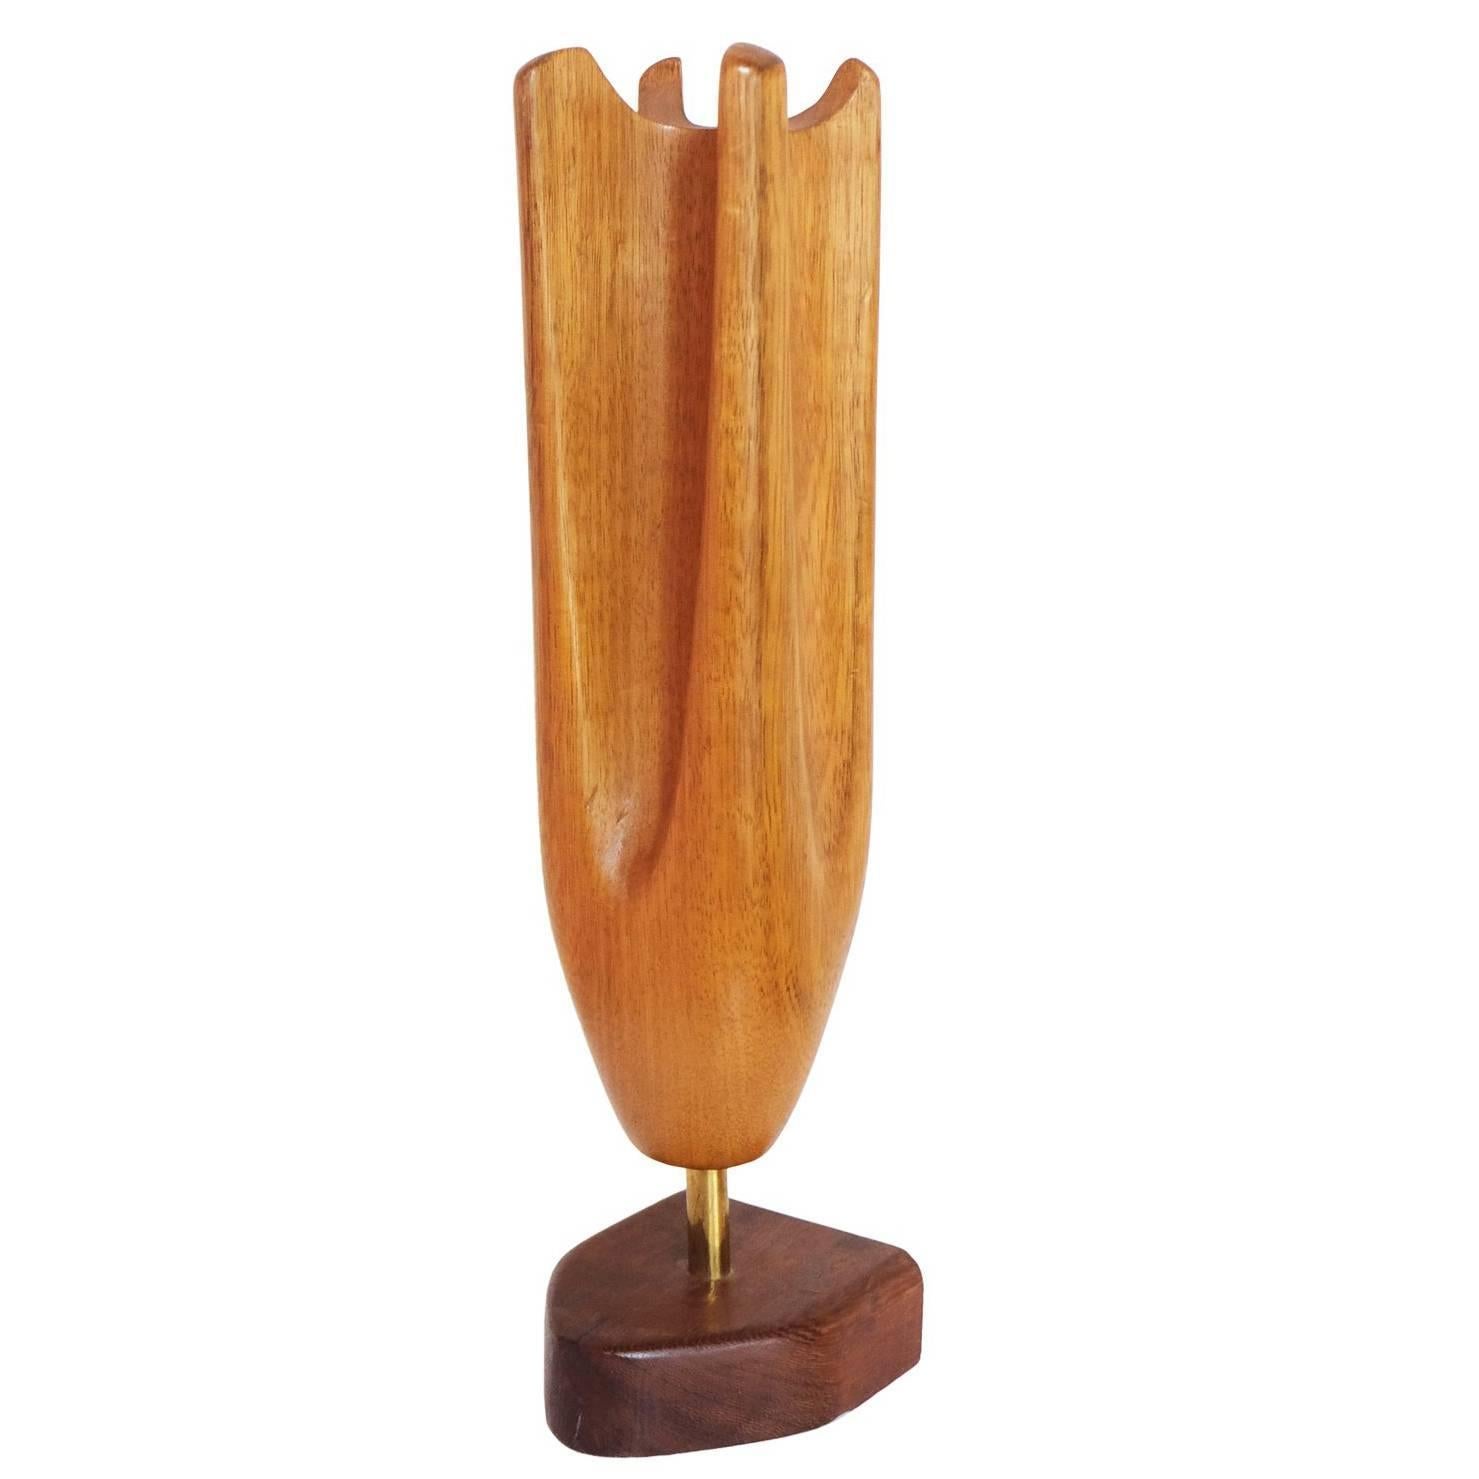 1960s abstract wooden sculpture designed and manufactured in the UK.

Hand carved figured sycamore design with a walnut base and brass stem.

Dimensions: 

H 40cm x W 10cm x D 12cm.
     

